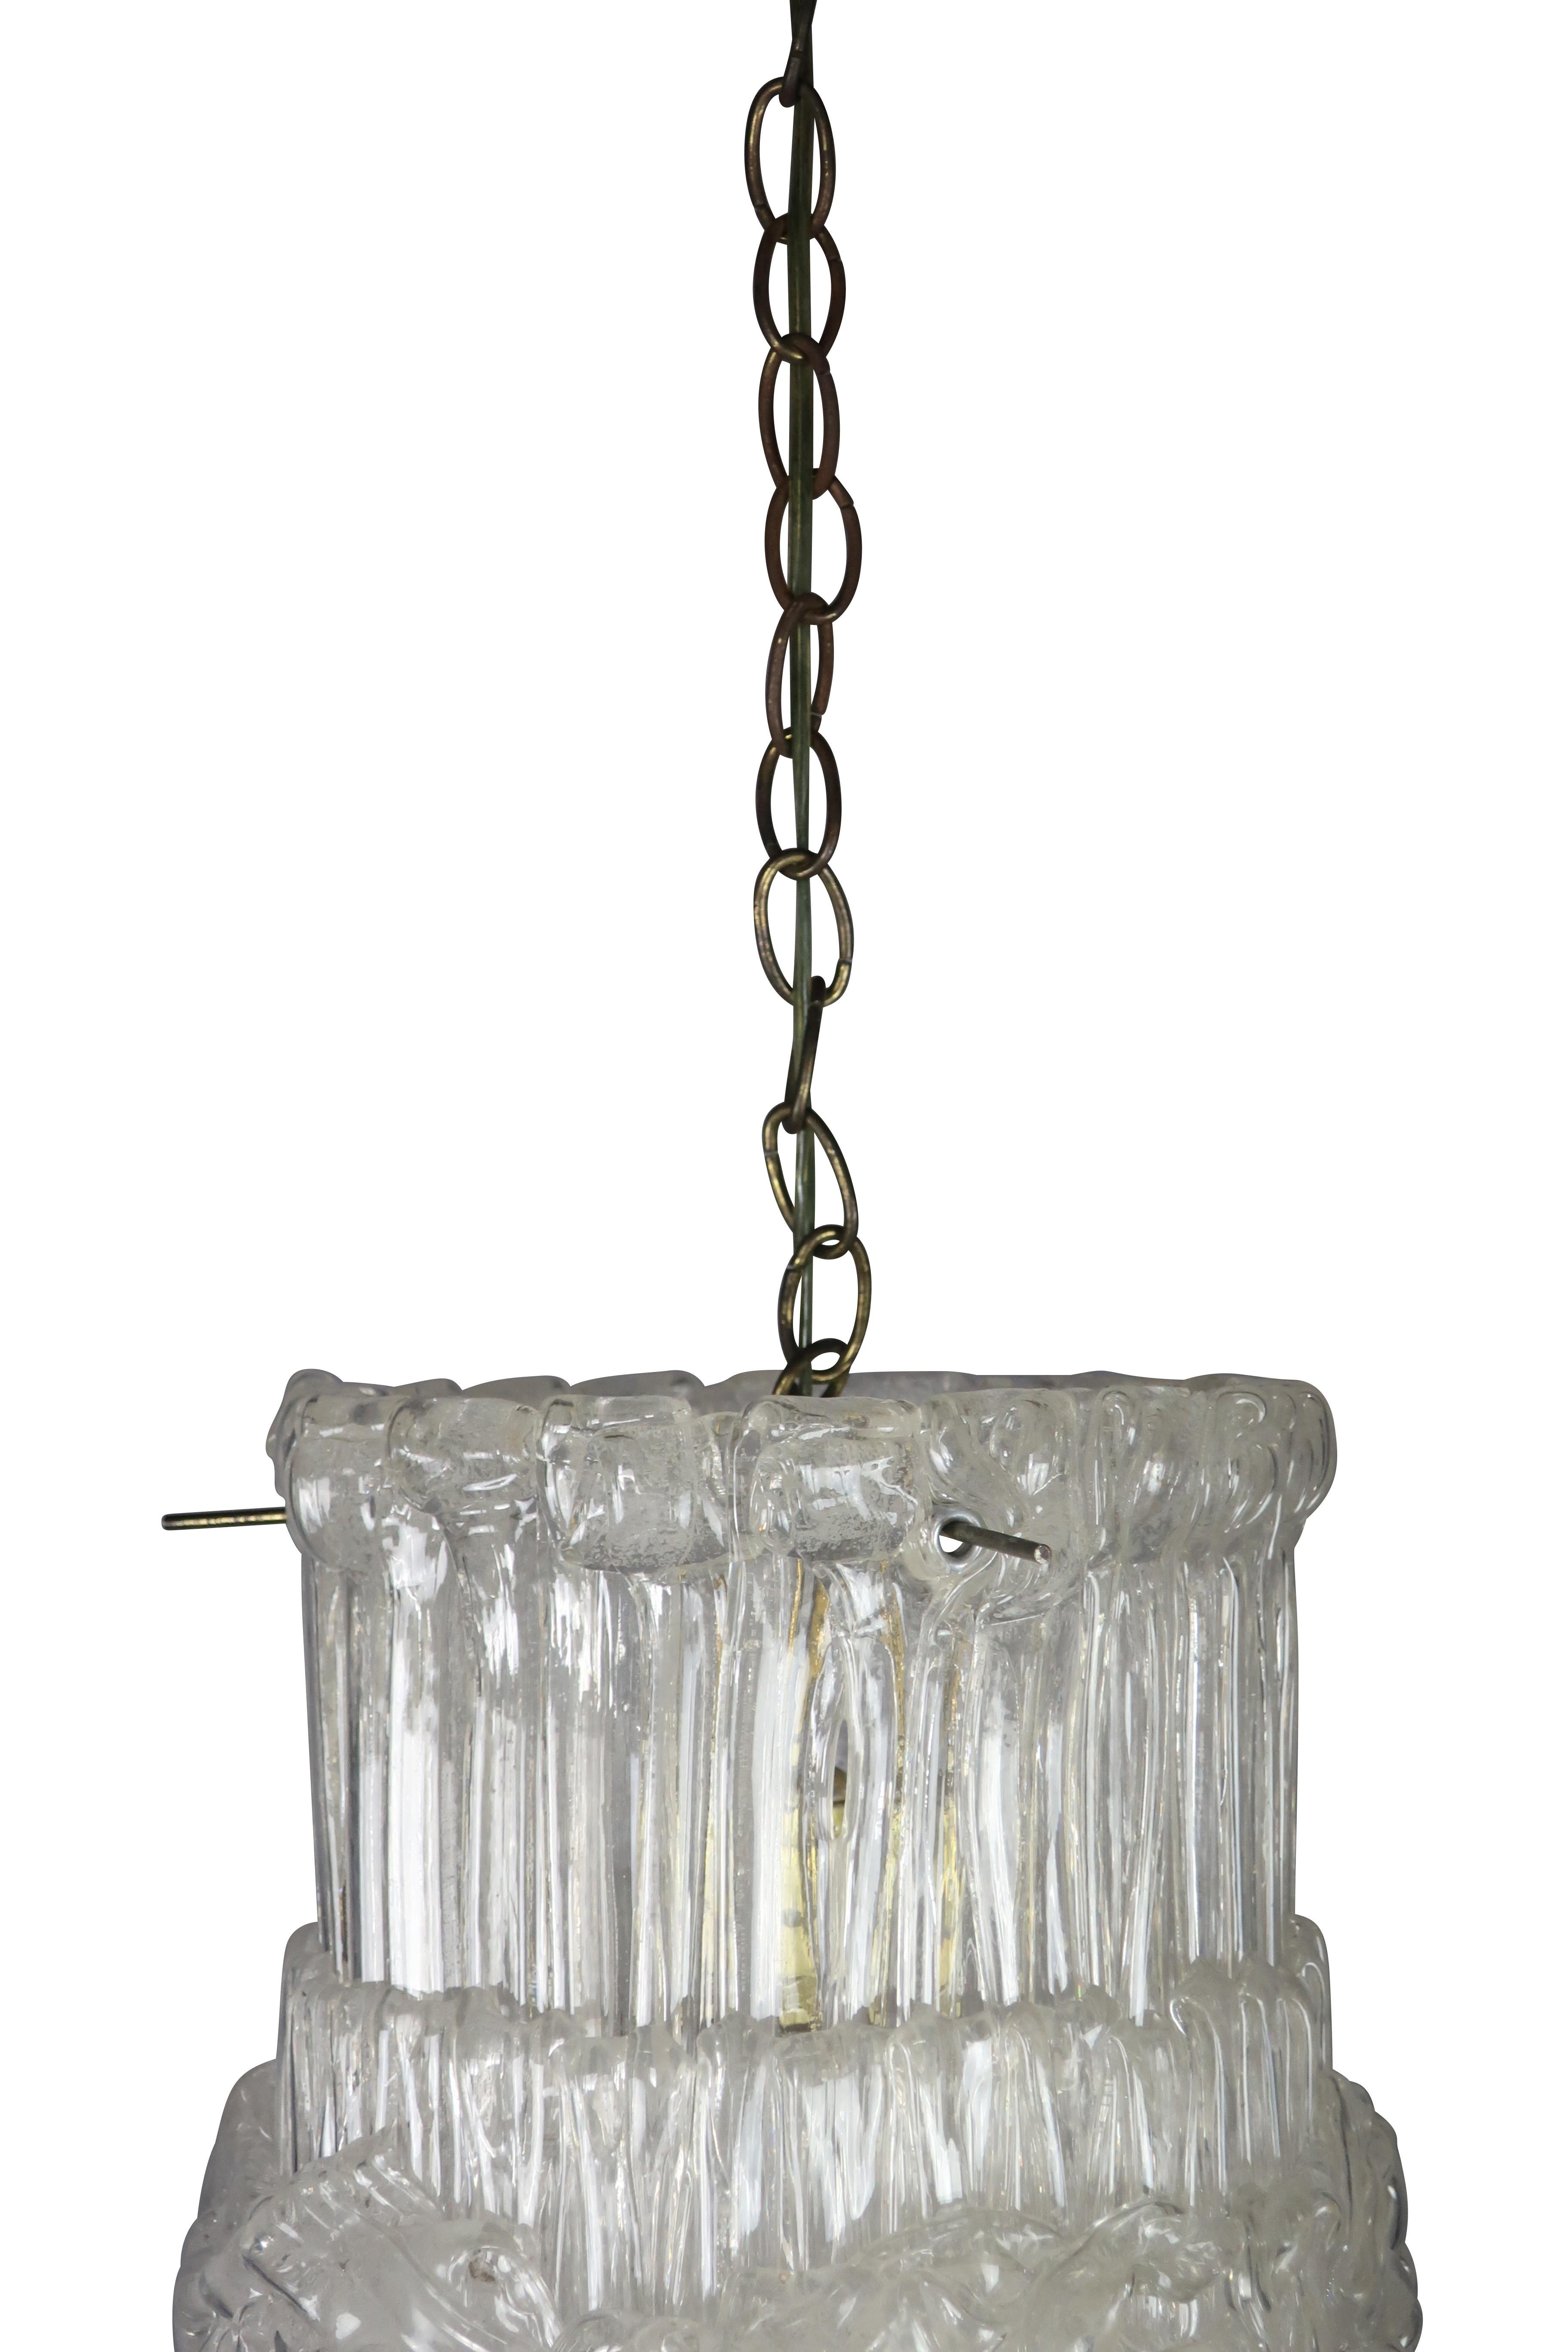 Lucite Vintage Hanging Pendant Lights In Good Condition For Sale In Essex, MA